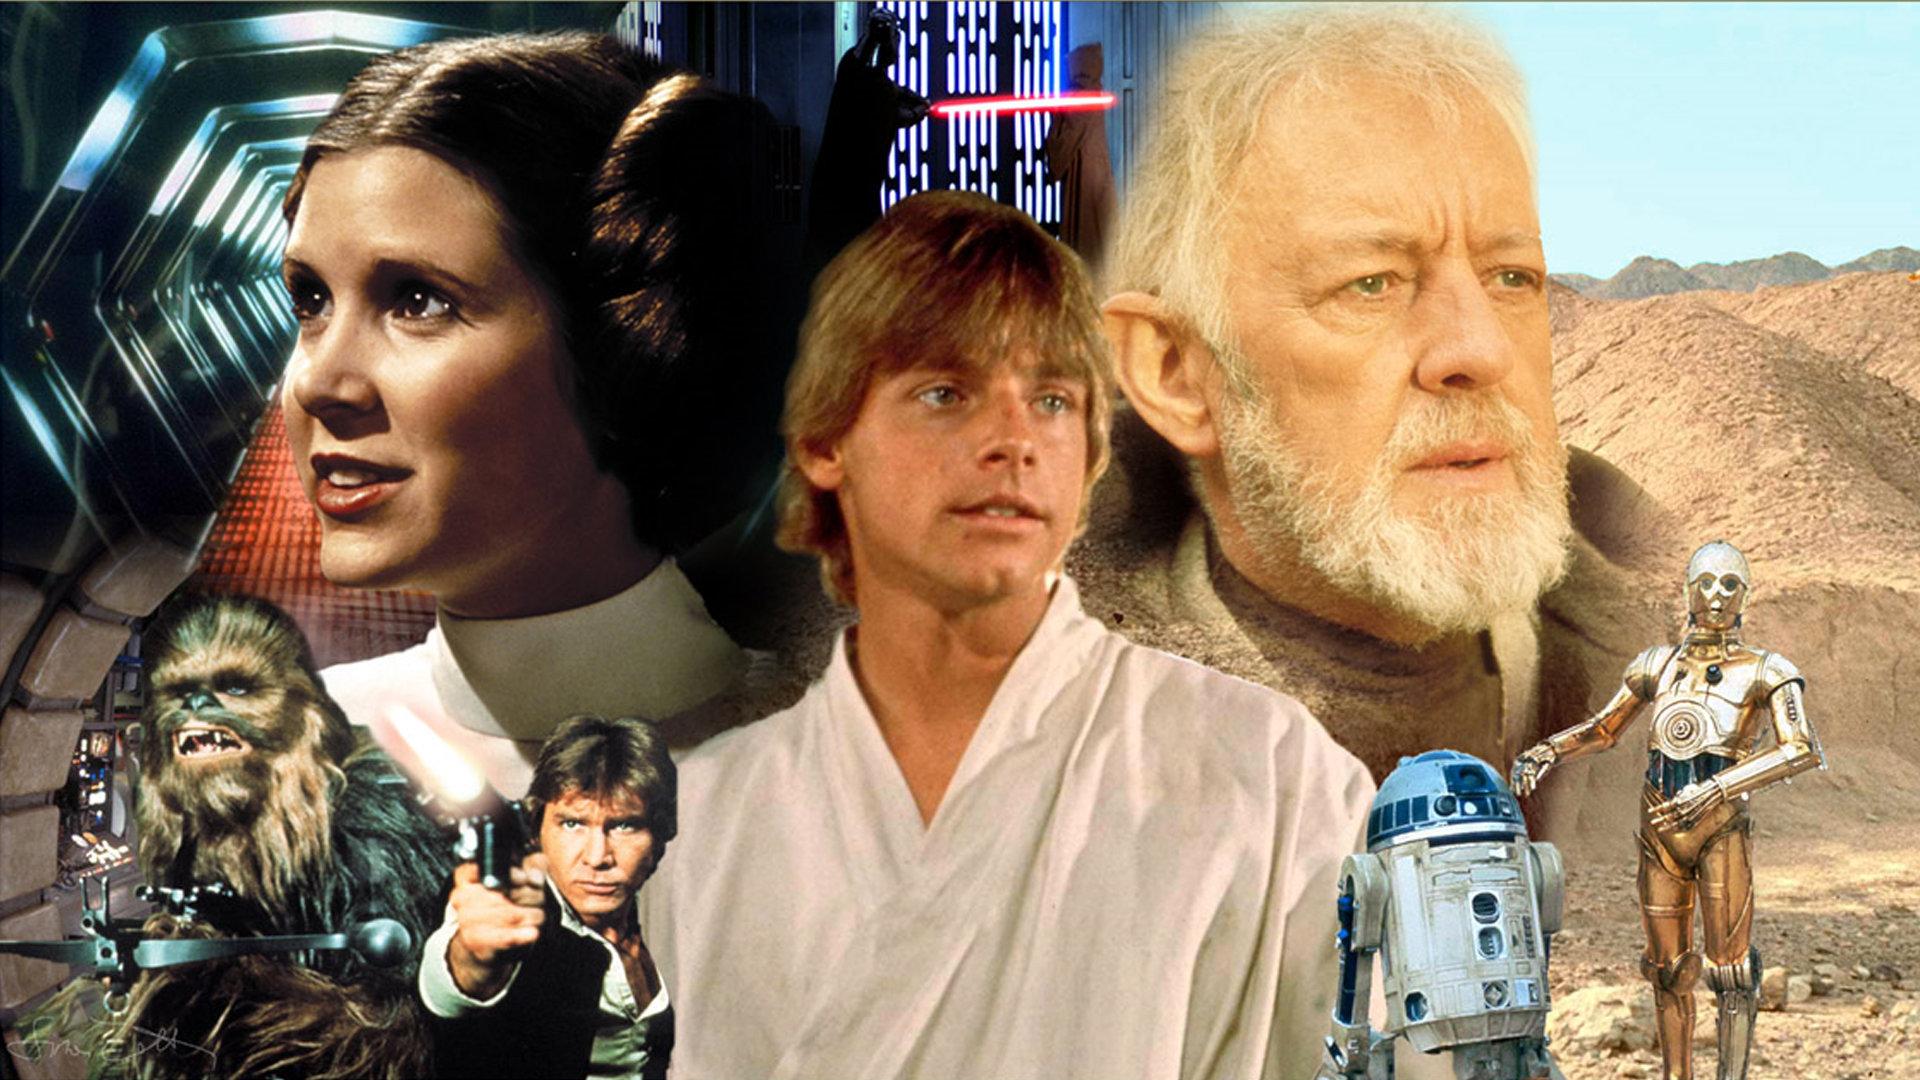 Star Wars Episode IV: A New Hope Wallpapers, Pictures, Images